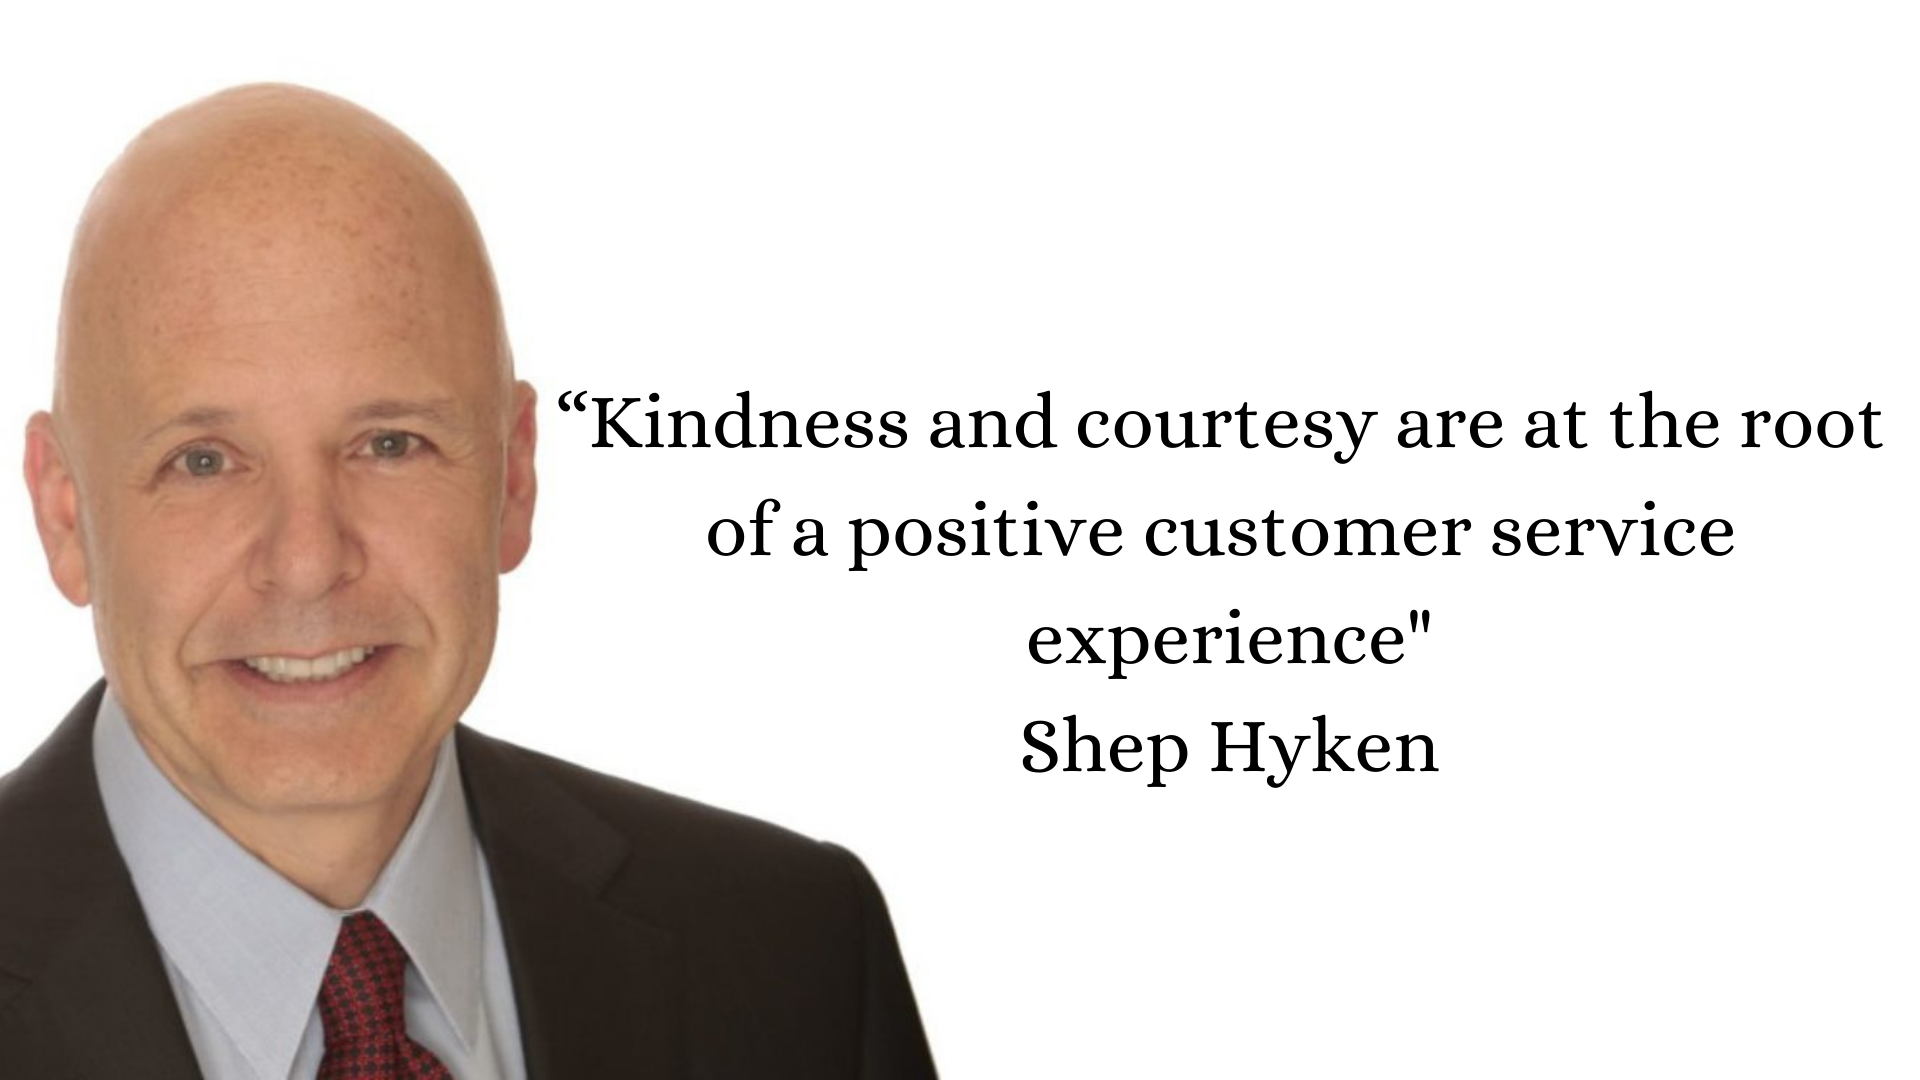 25 Motivational Customer Service Quotes For Your Business